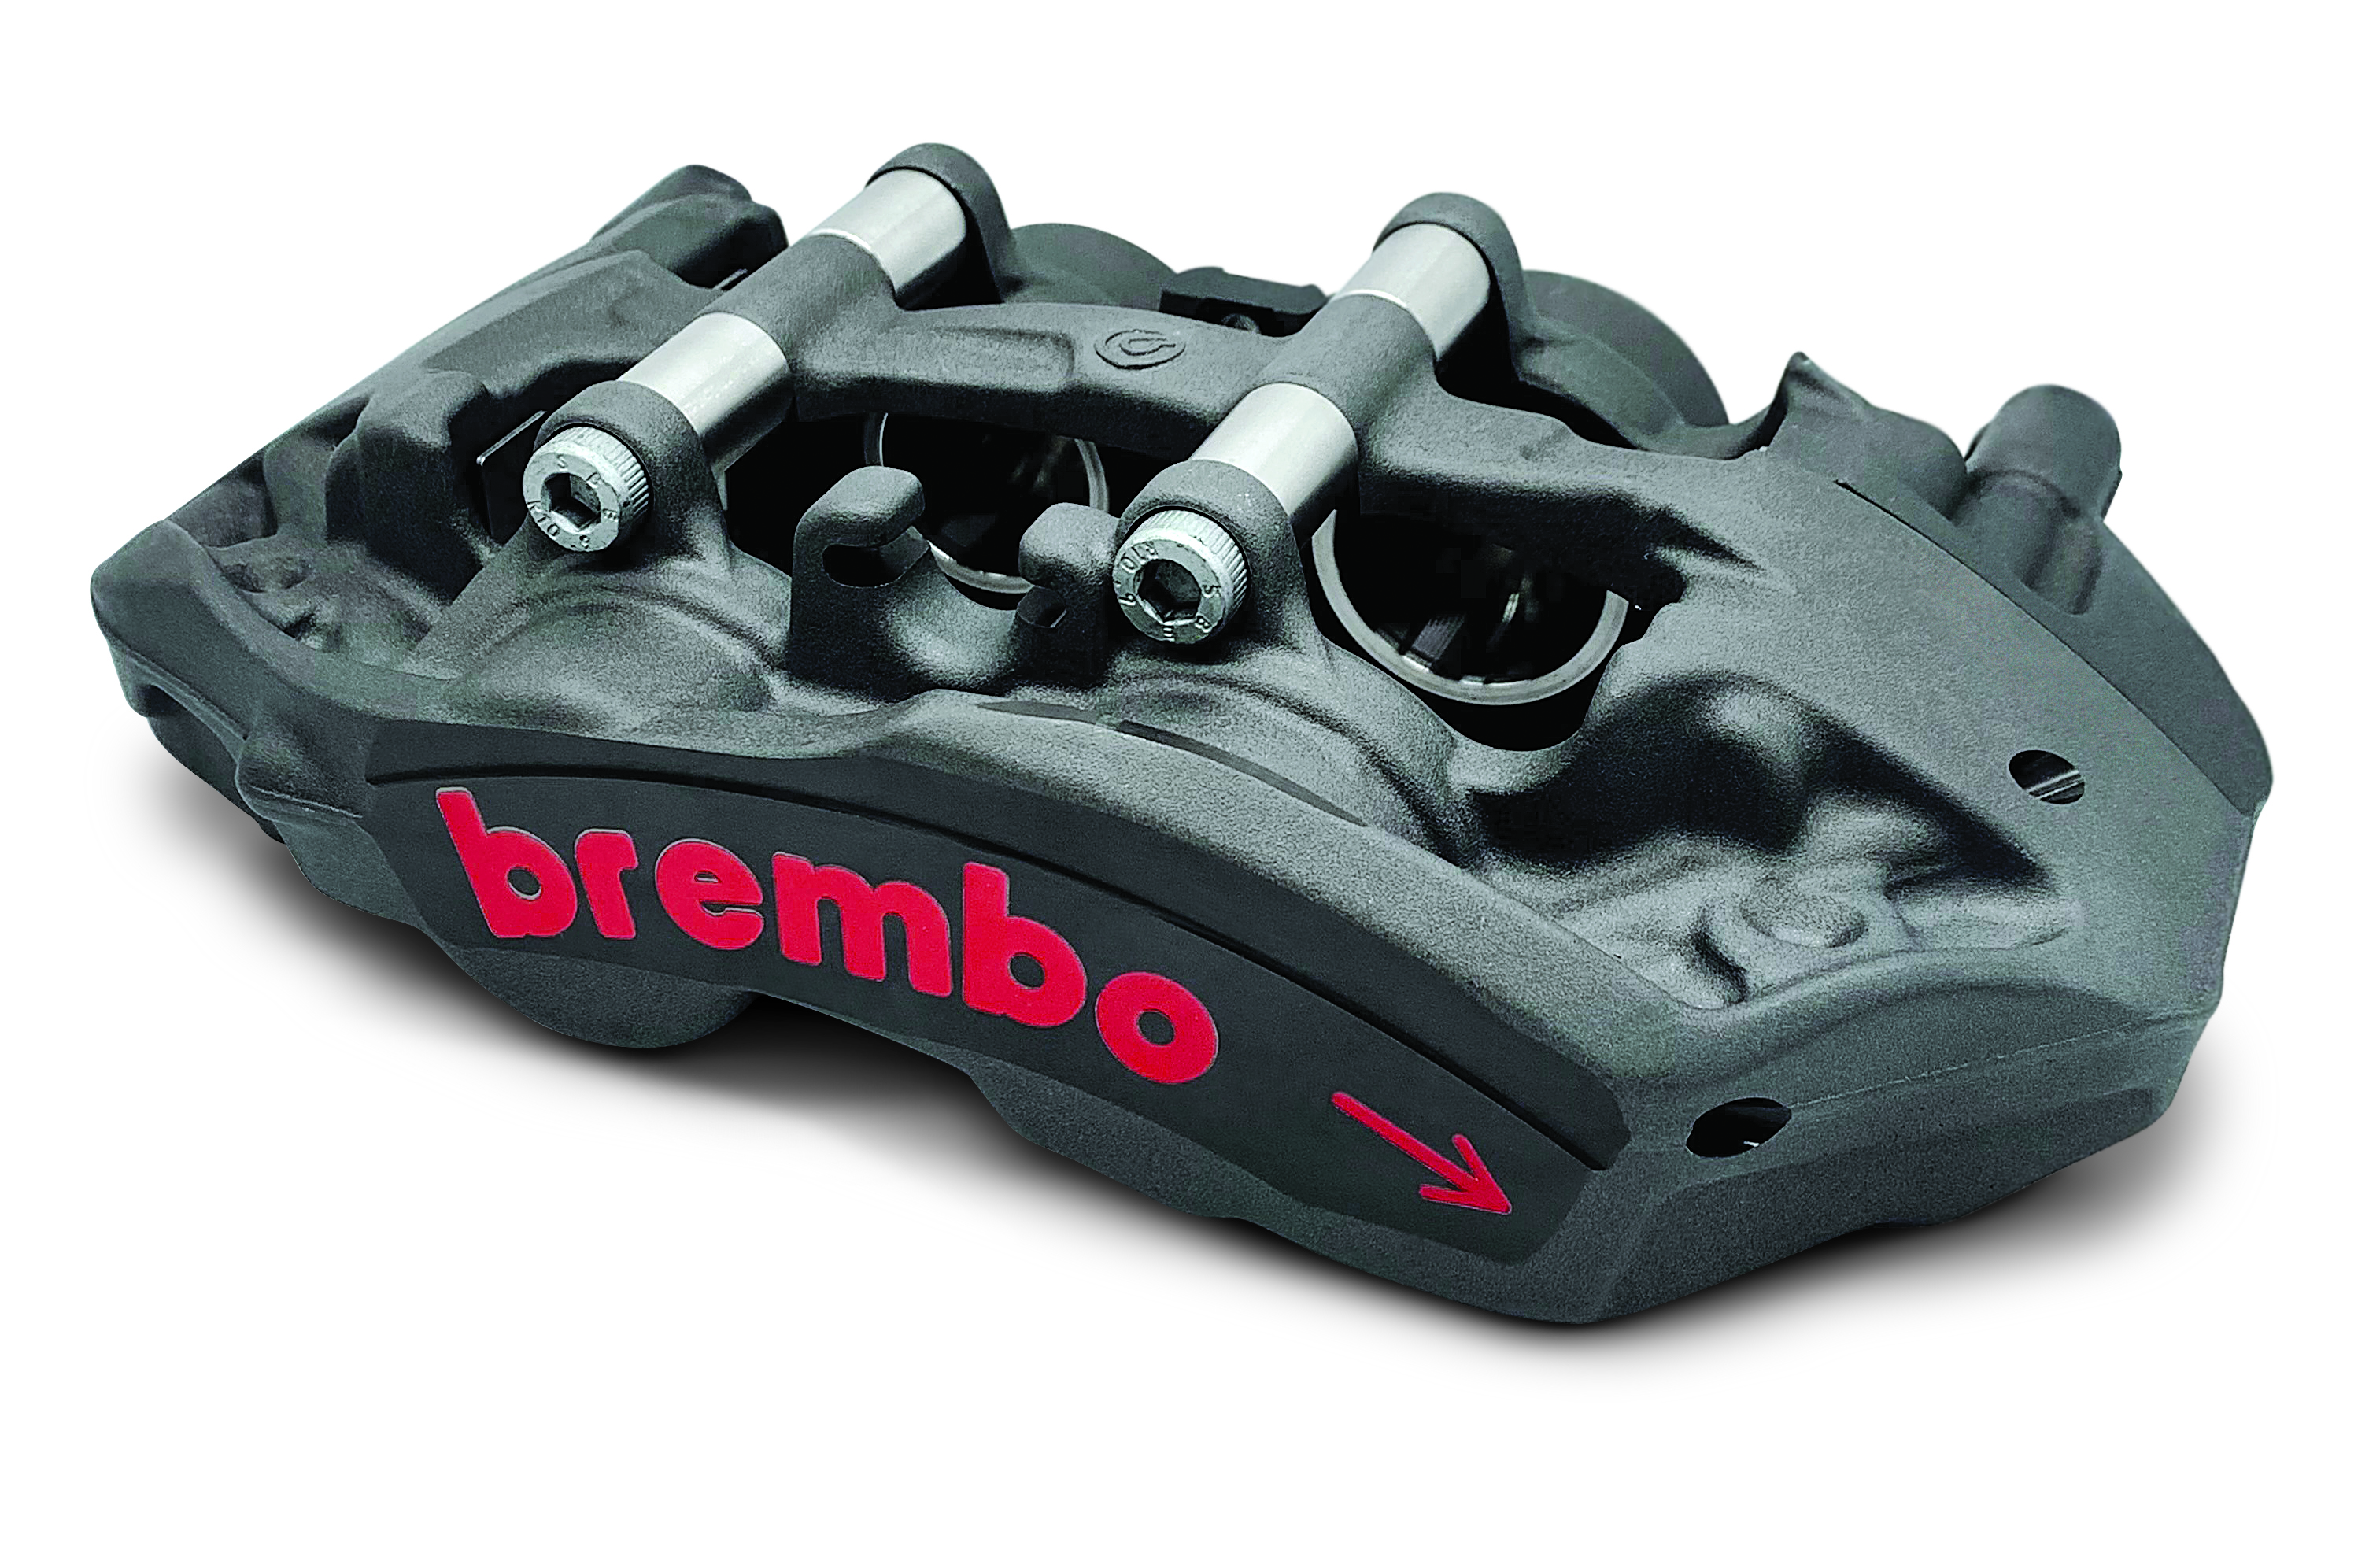 Brembo introduces all new braking system for dirt and asphalt late model  applications